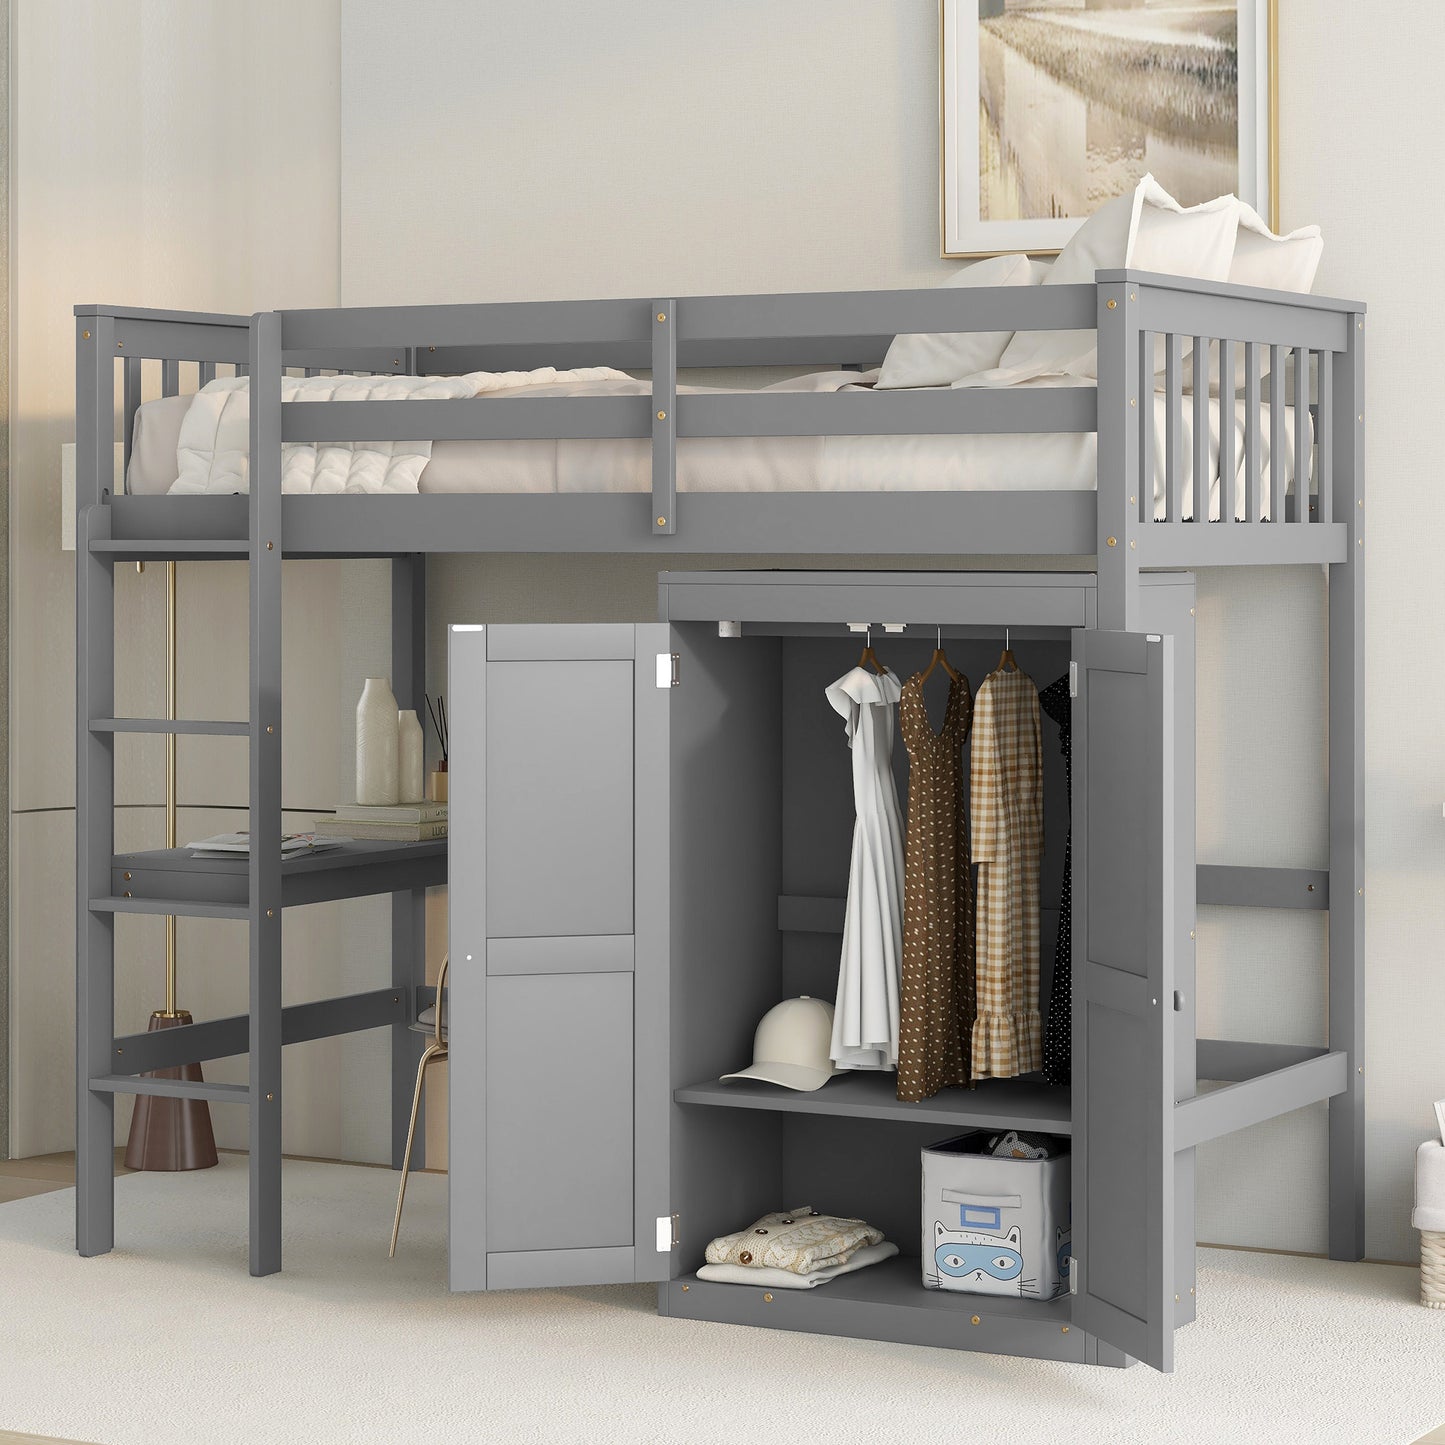 TWIN LOFT BED WITH DESK AND WARDROBE FOR GREY COLOR